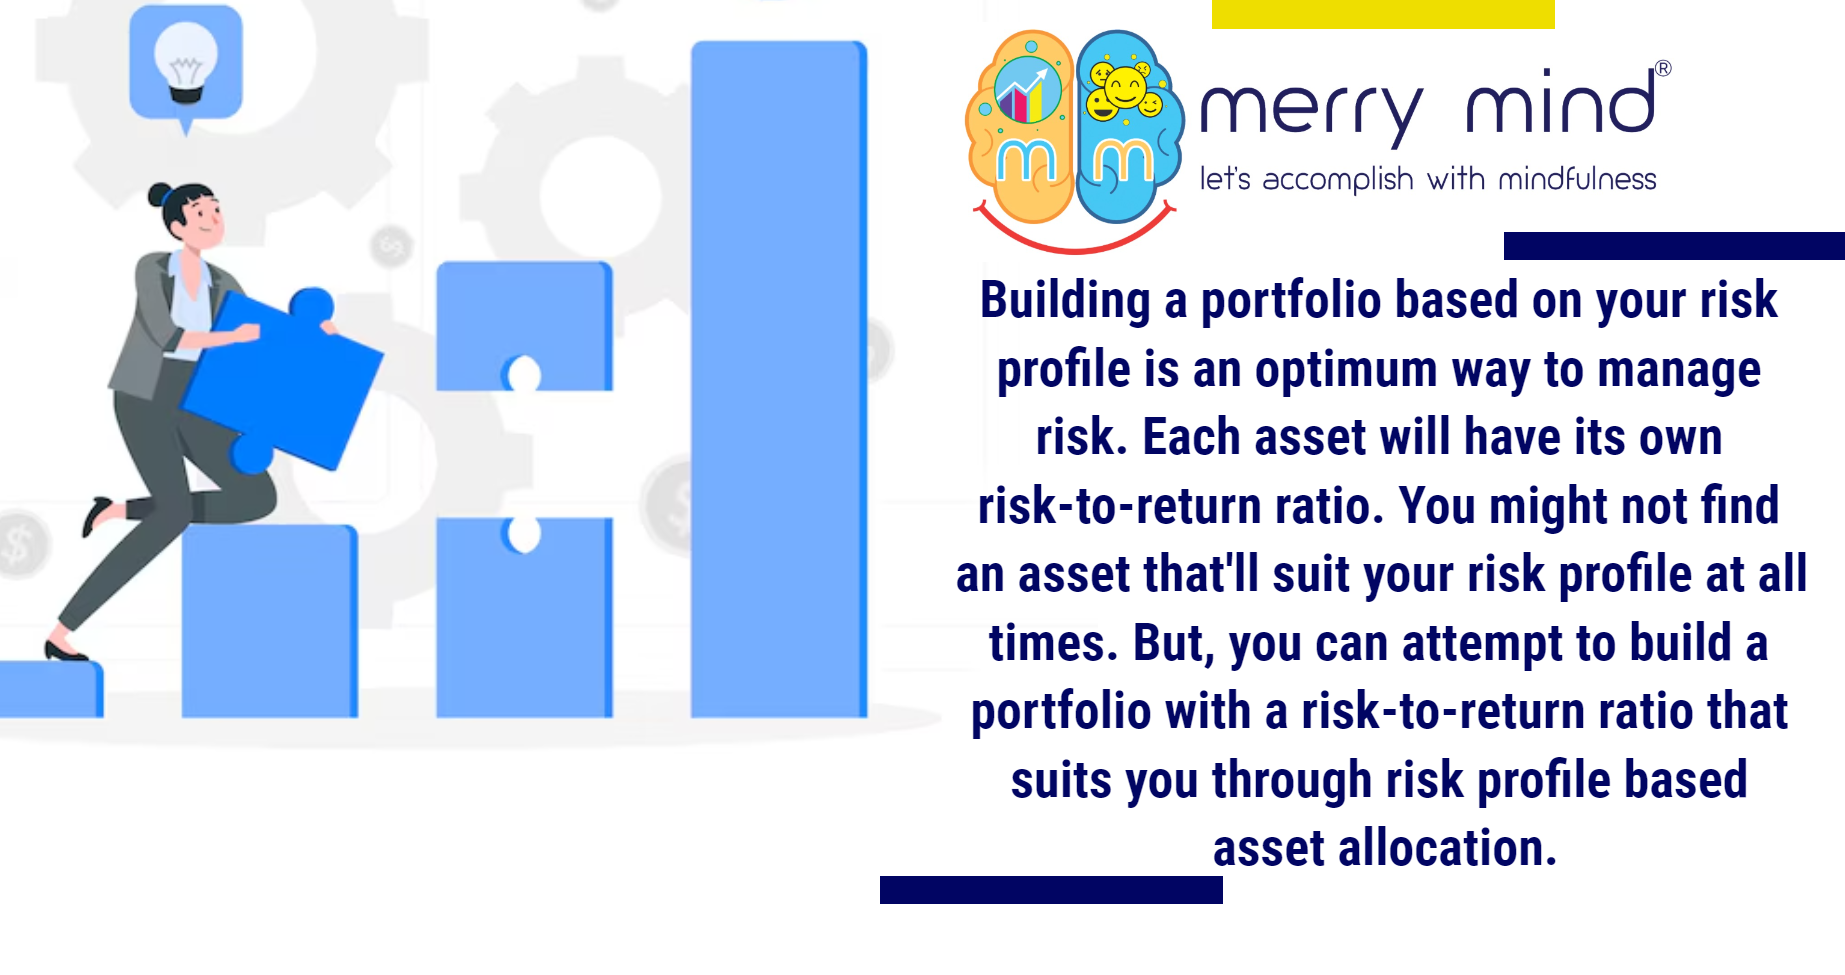 Asset allocation strategy based on risk profile is a suitable approach towards wealth creation